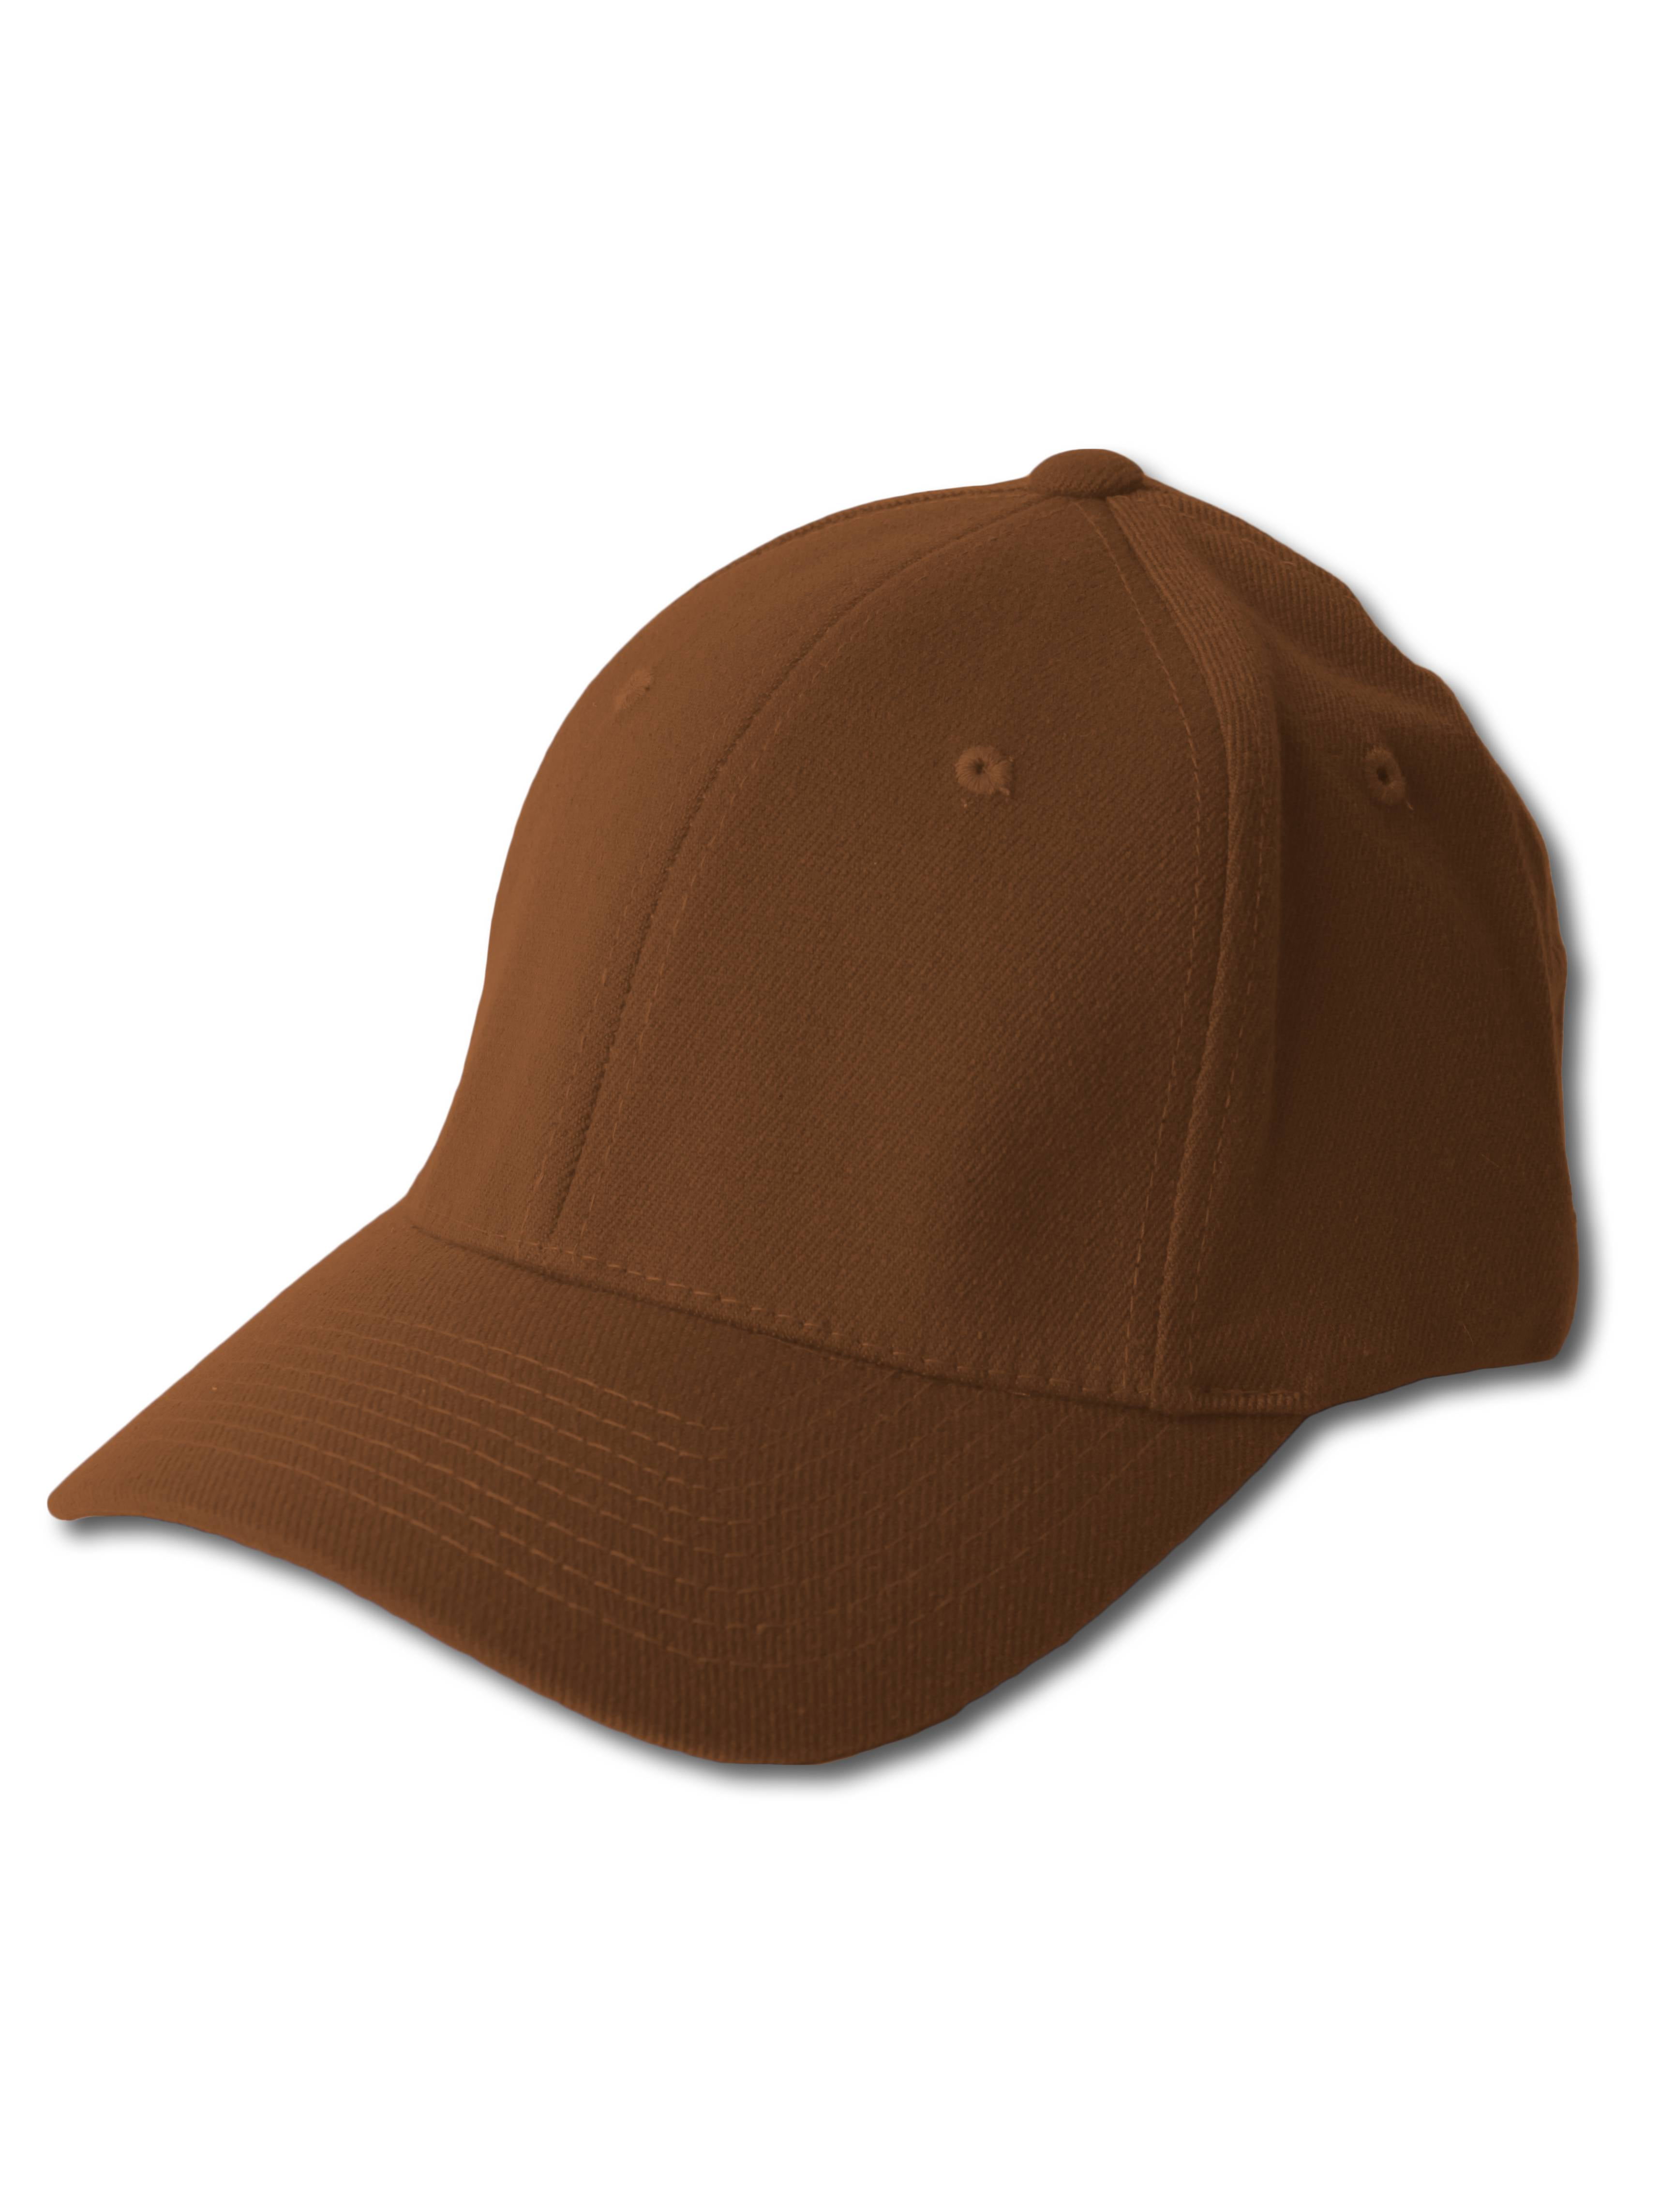 Large-XL Flex Fitted Baseball Cap Hat Brown